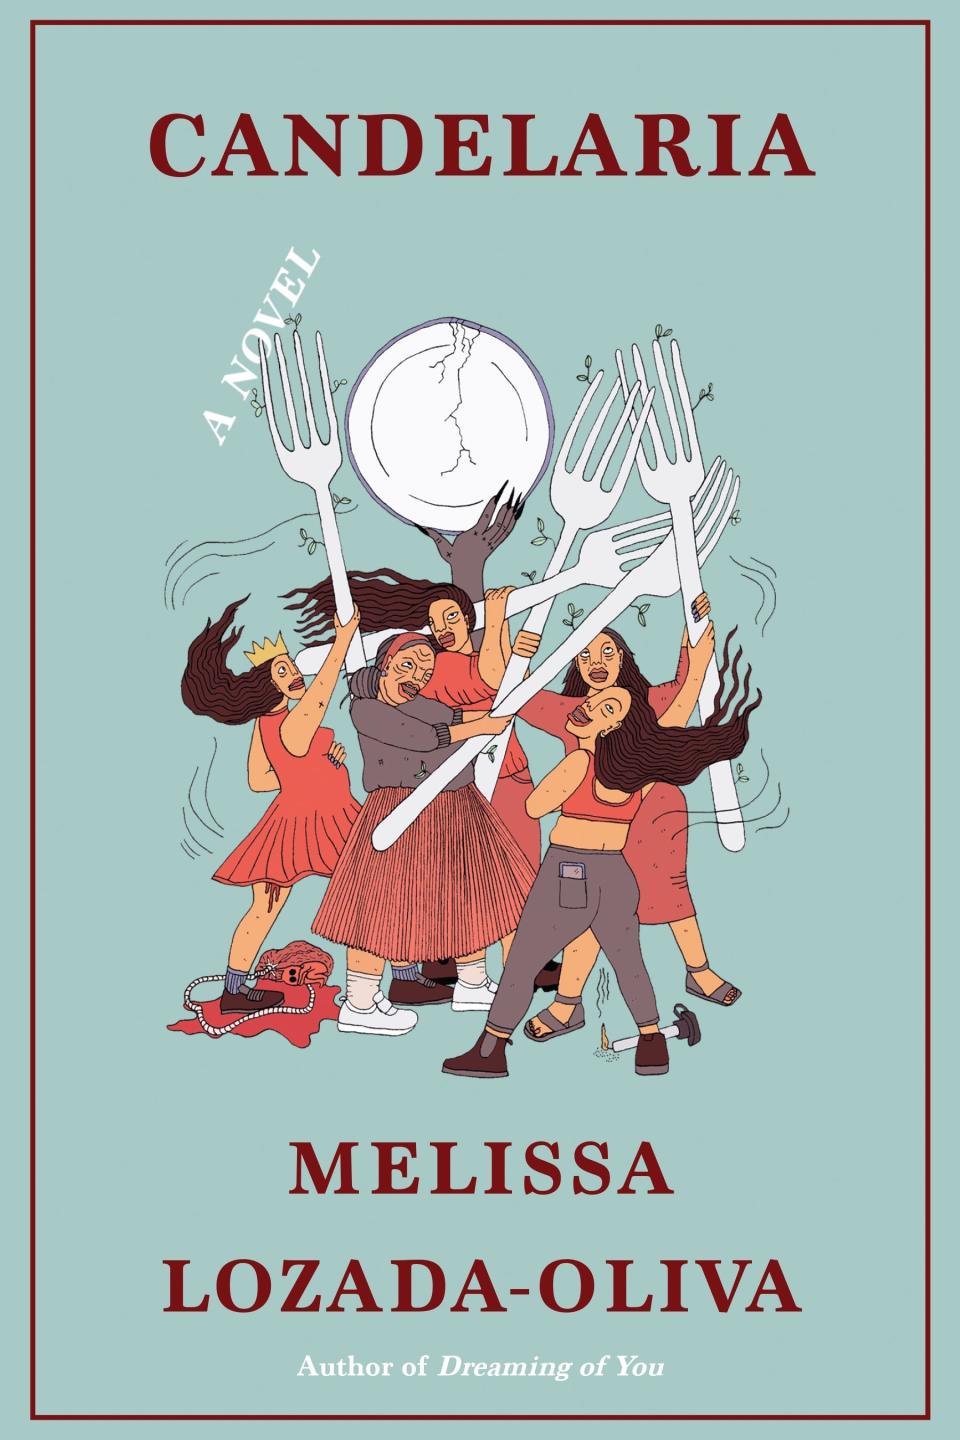 A sweeping, mystical novel following three generations of women as they grapple with muddled pasts and predetermined futures, "Candelaria" by Melissa Lozada-Oliva is a story of love that eats us alive.